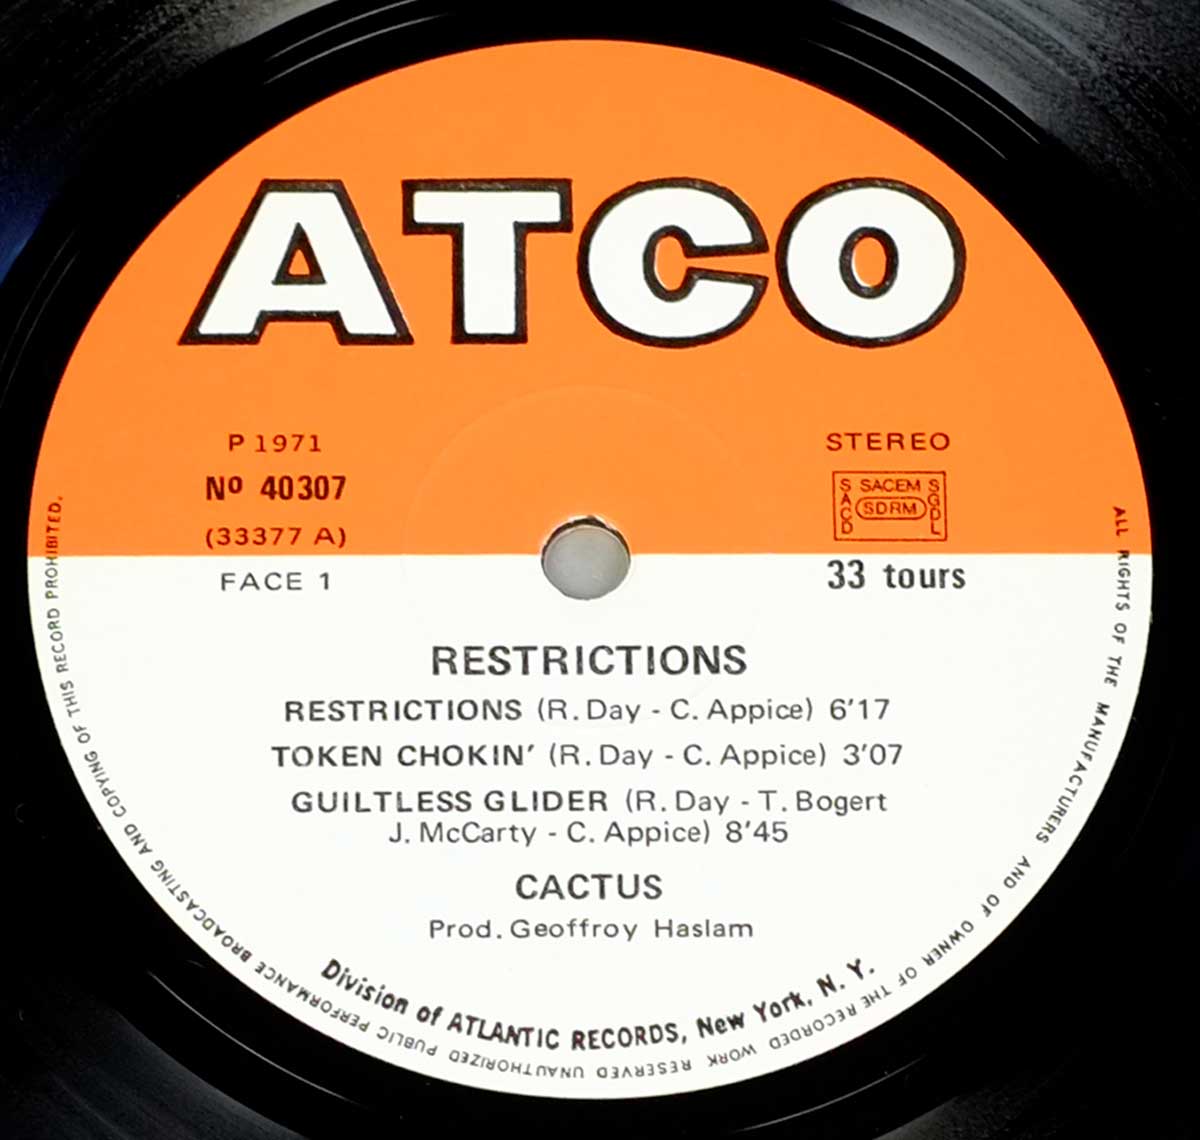 Photo of "CACTUS - Restrictions" ATCO Orange and White Record Label with catalognr 40 307